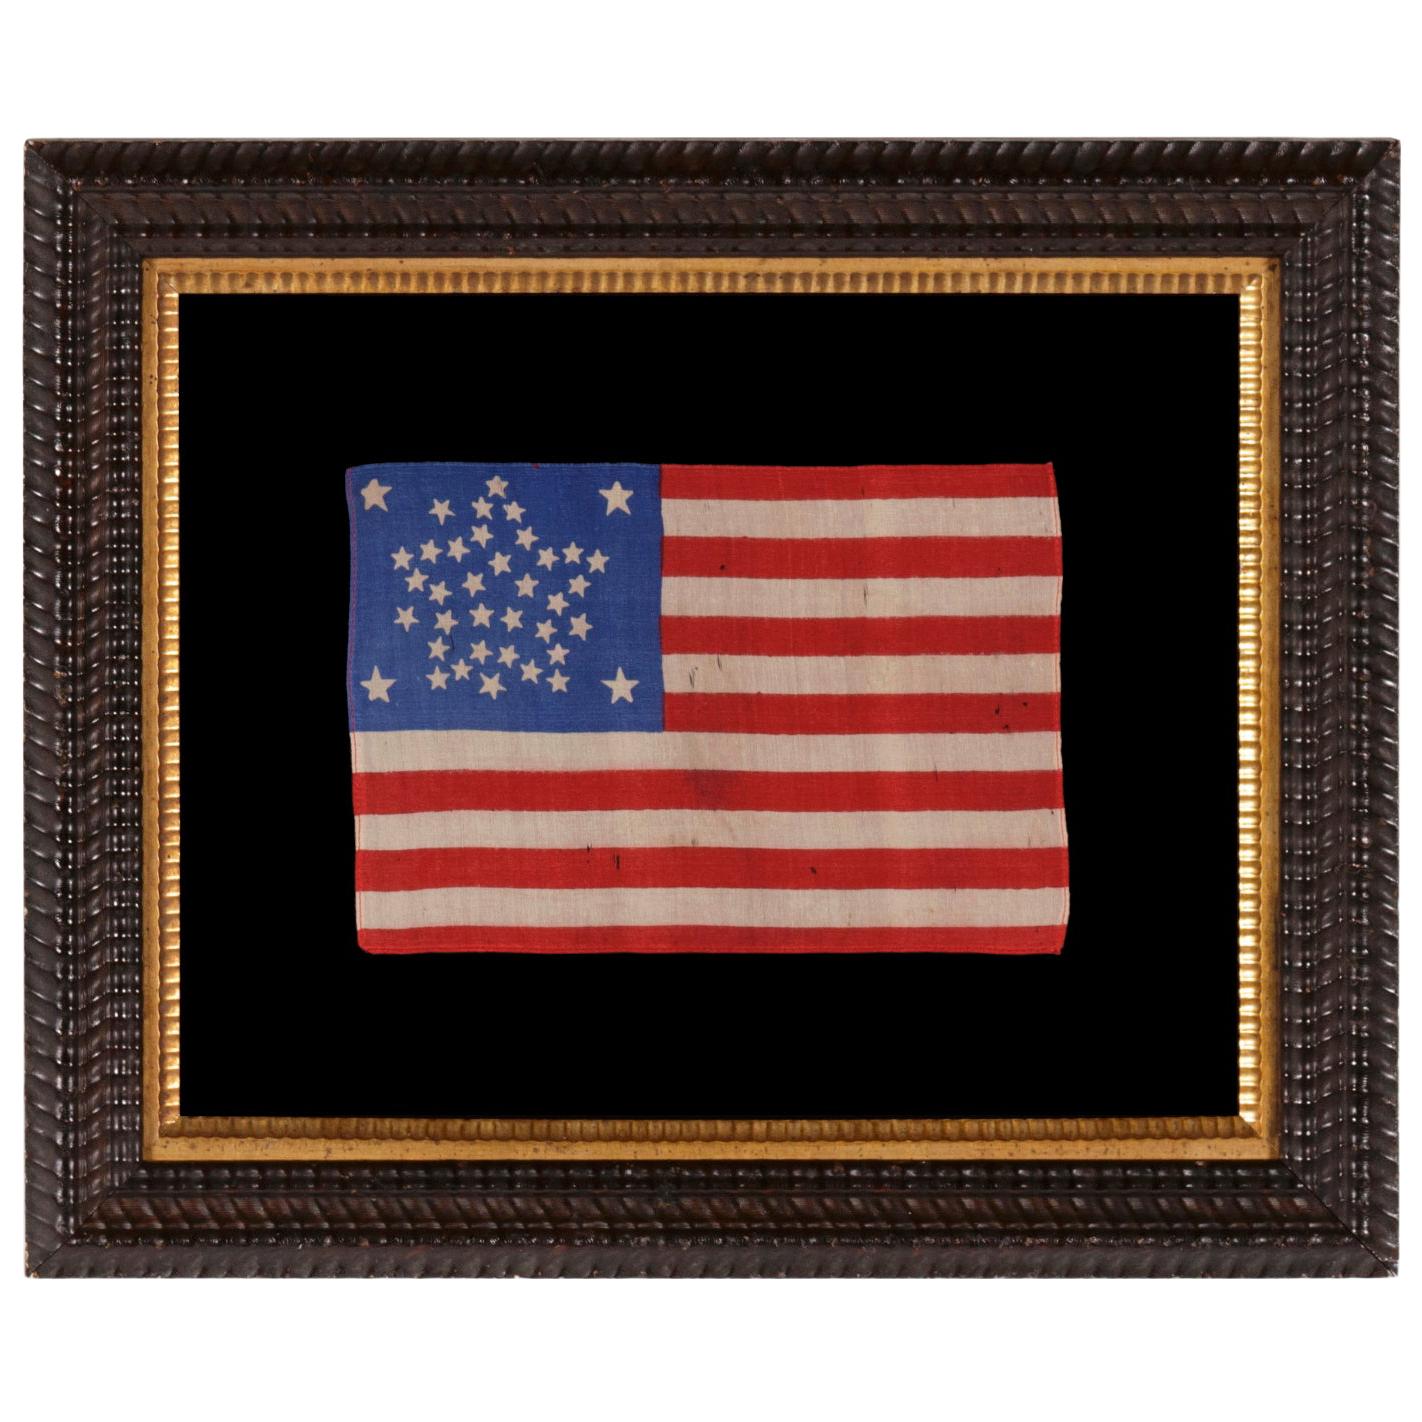 38 Star American Flag with Stars Arranged in a "Great Star" Pattern